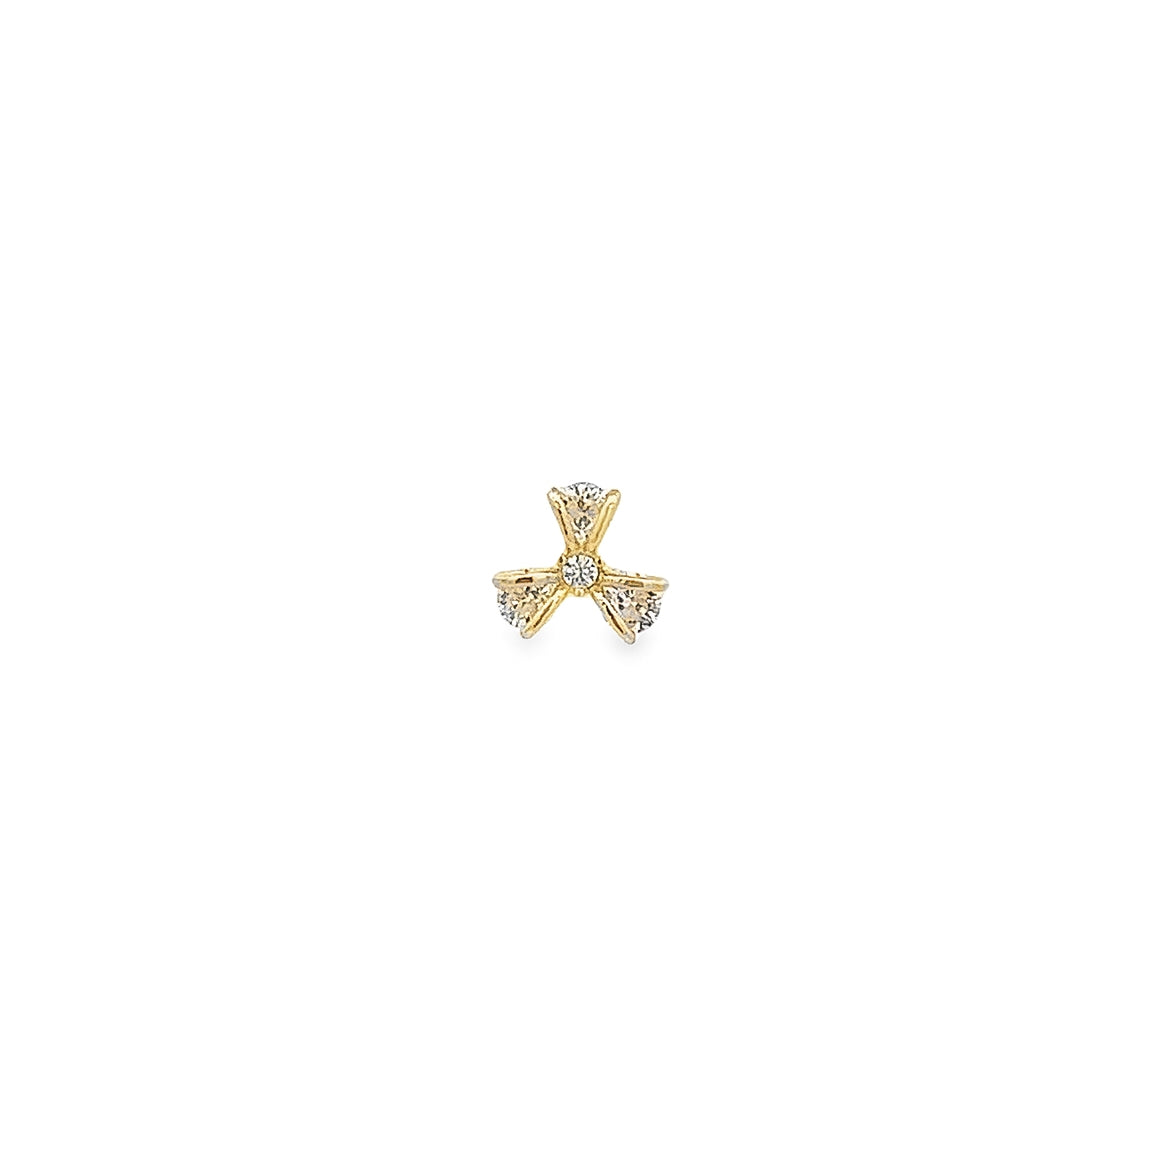 14K GOLD SINGLE FLOWER PIERCING WITH CRYSTALS